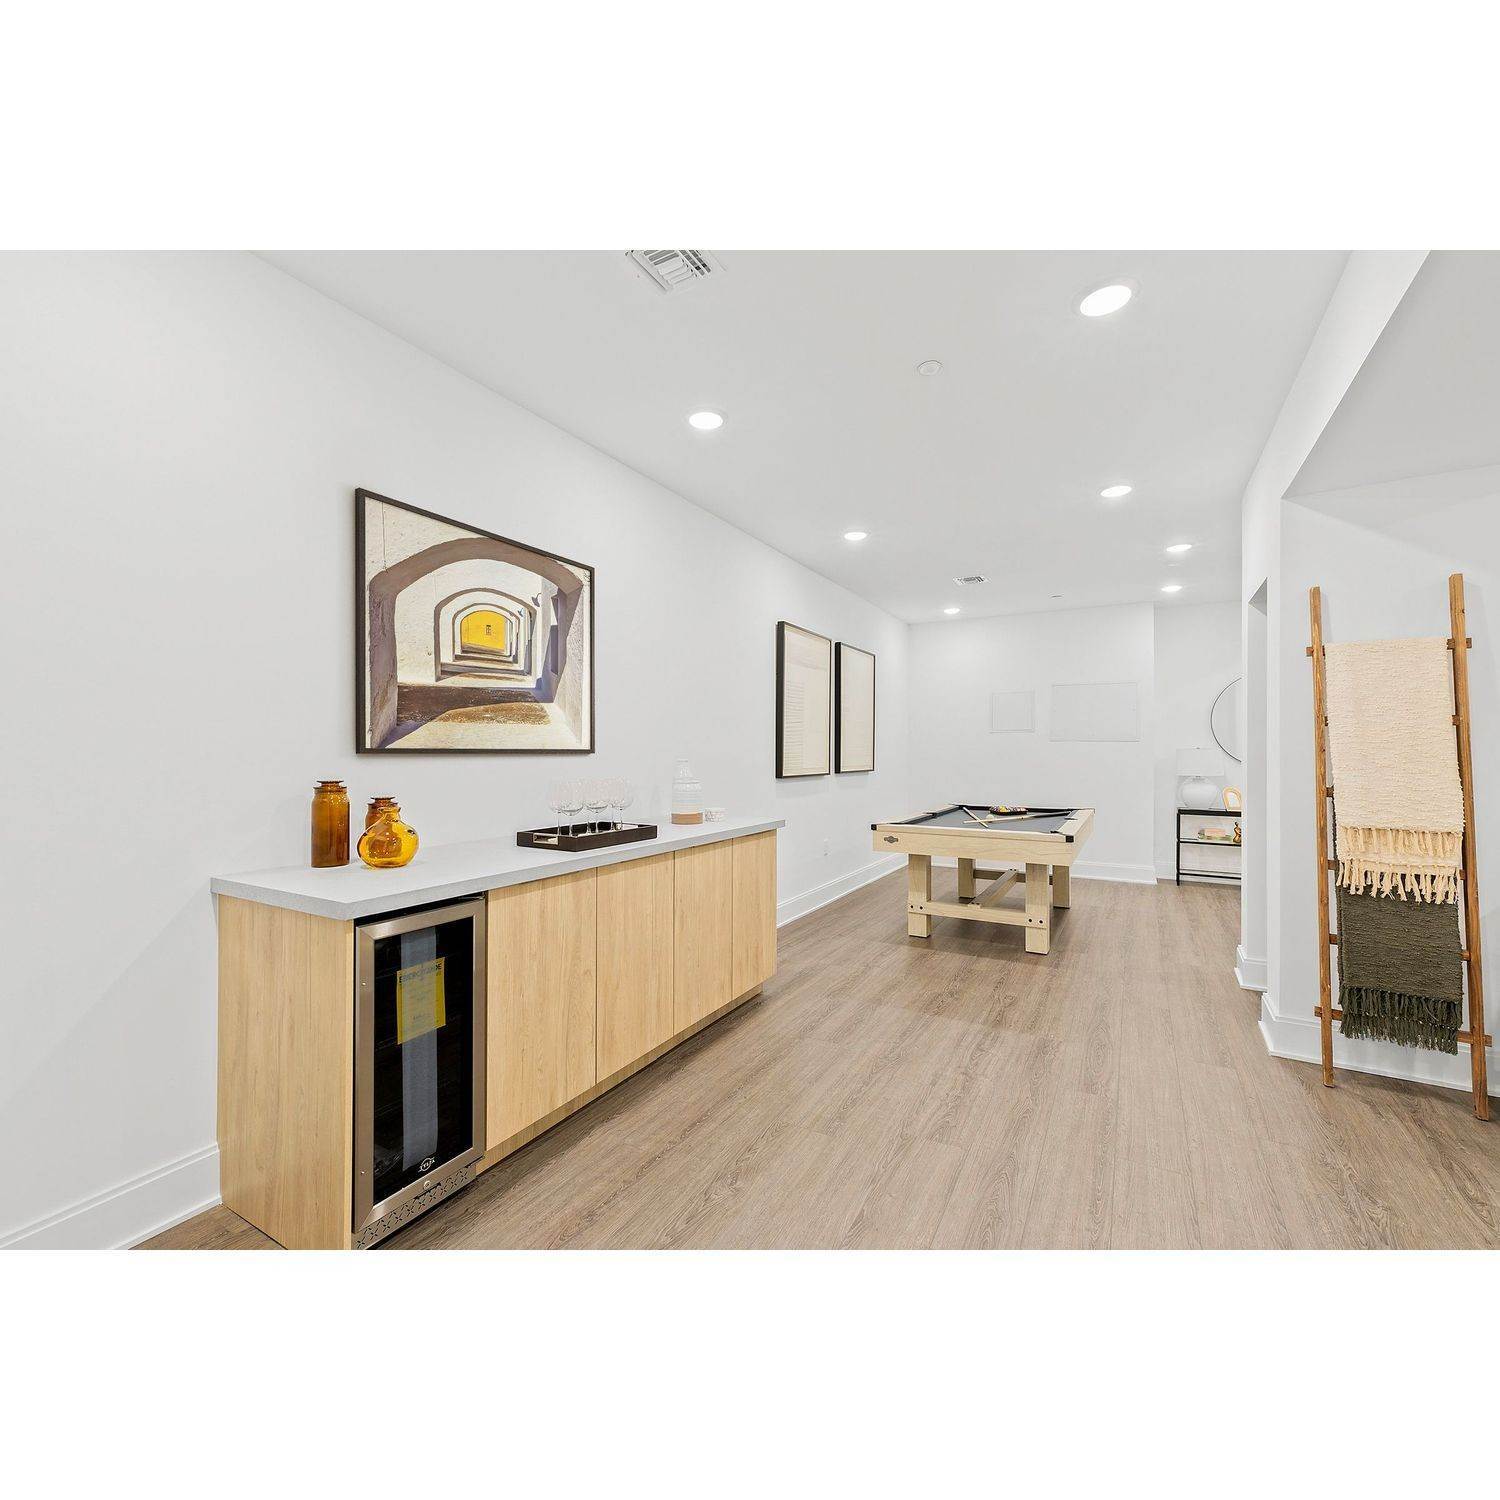 26. Meadowbrook Pointe East Meadow xây dựng tại 123 Merrick Avenue, East Meadow, NY 11554